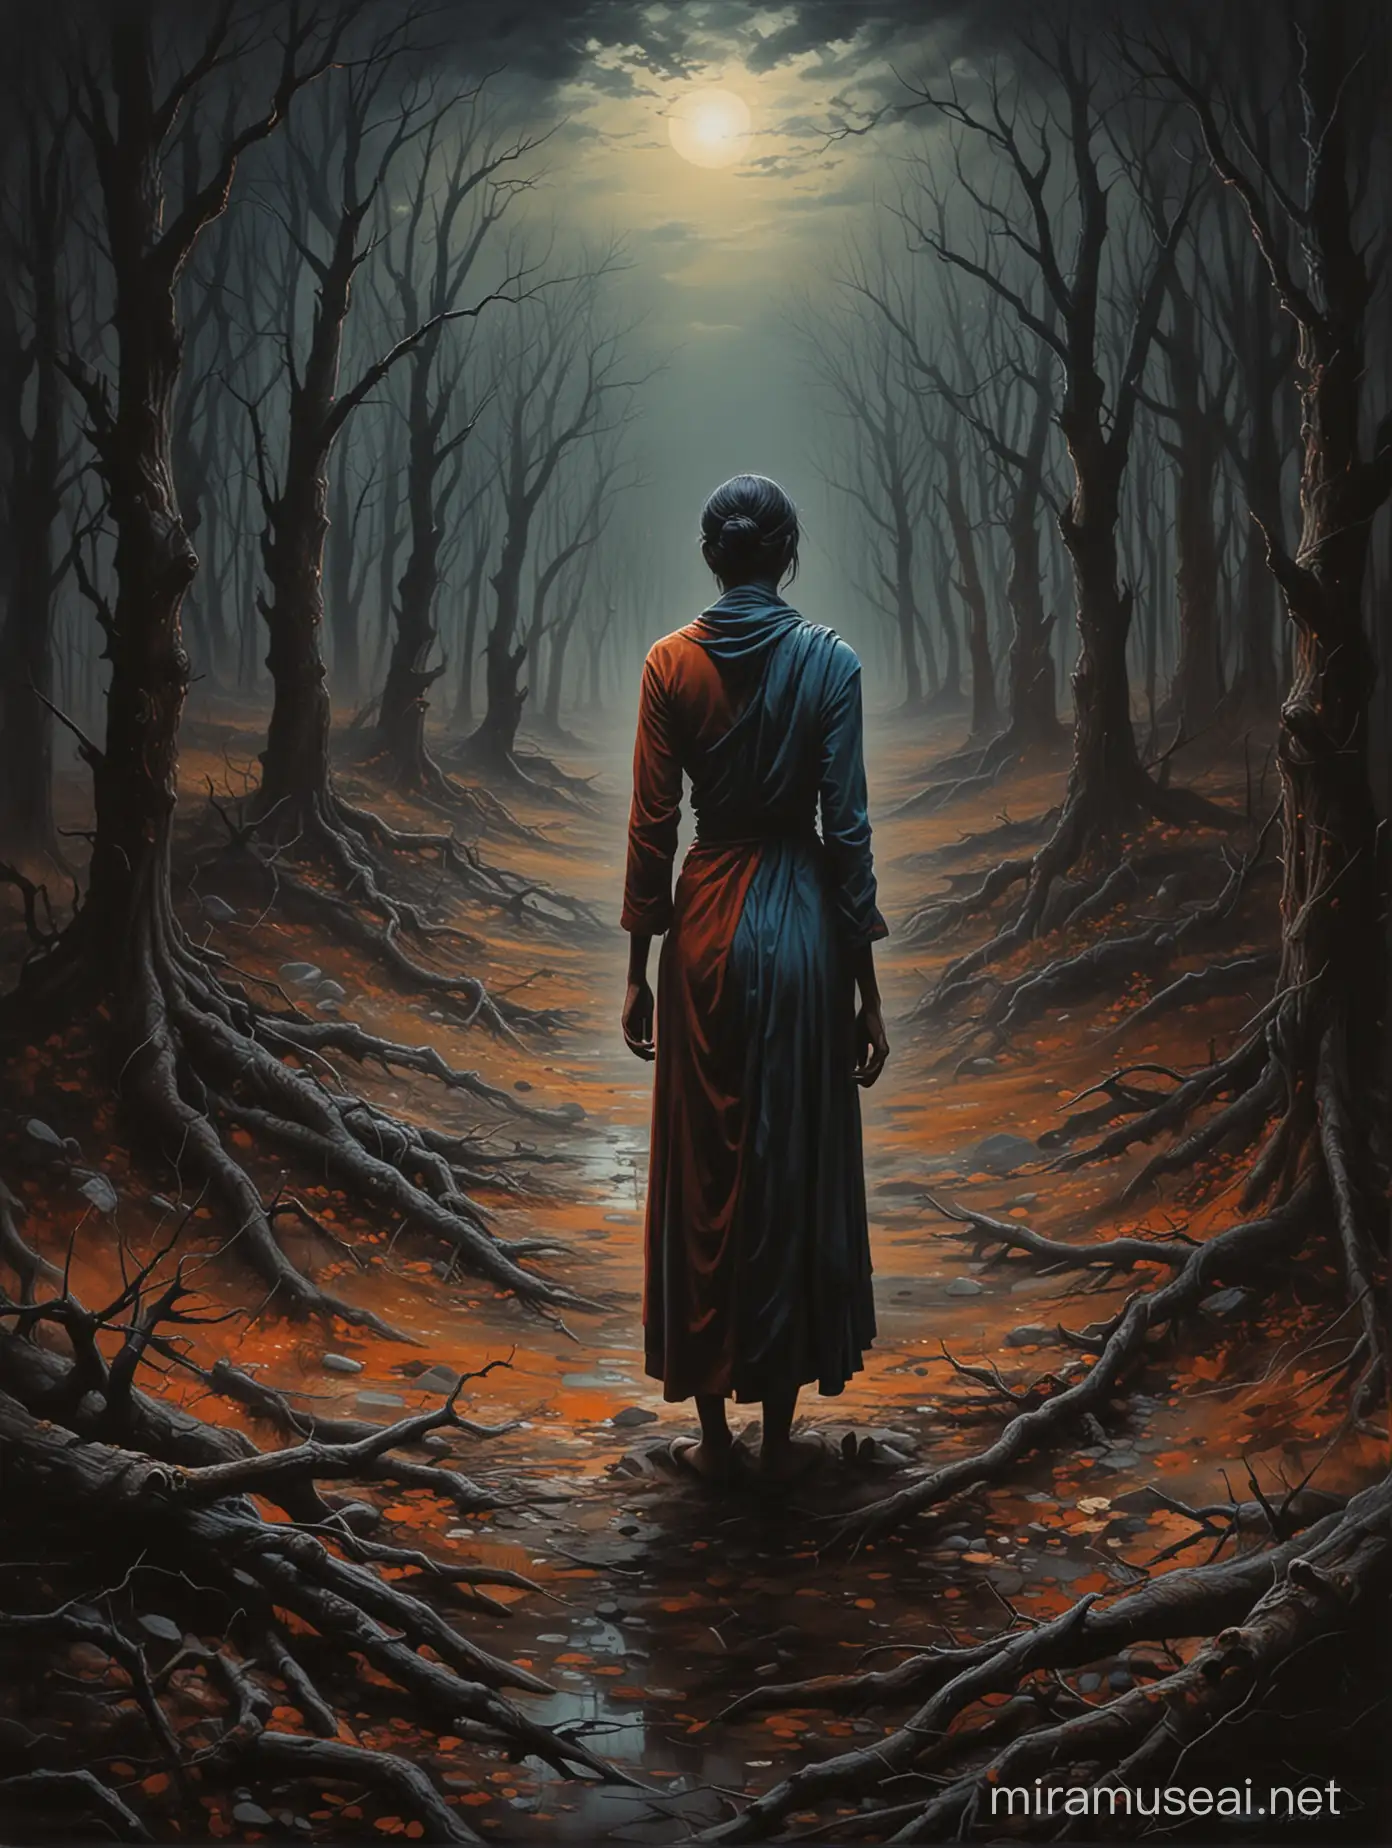 Surrealistic painting by Durga Batal Batsayan, featuring a figure lost in a dark and shadowy landscape, filled with doubt and fear. Detailed brushstrokes create an eerie atmosphere, while the use of vibrant colors adds a sense of intensity to the piece. The surrealist style adds an element of mystery and intrigue to the overall composition. (long shot)
